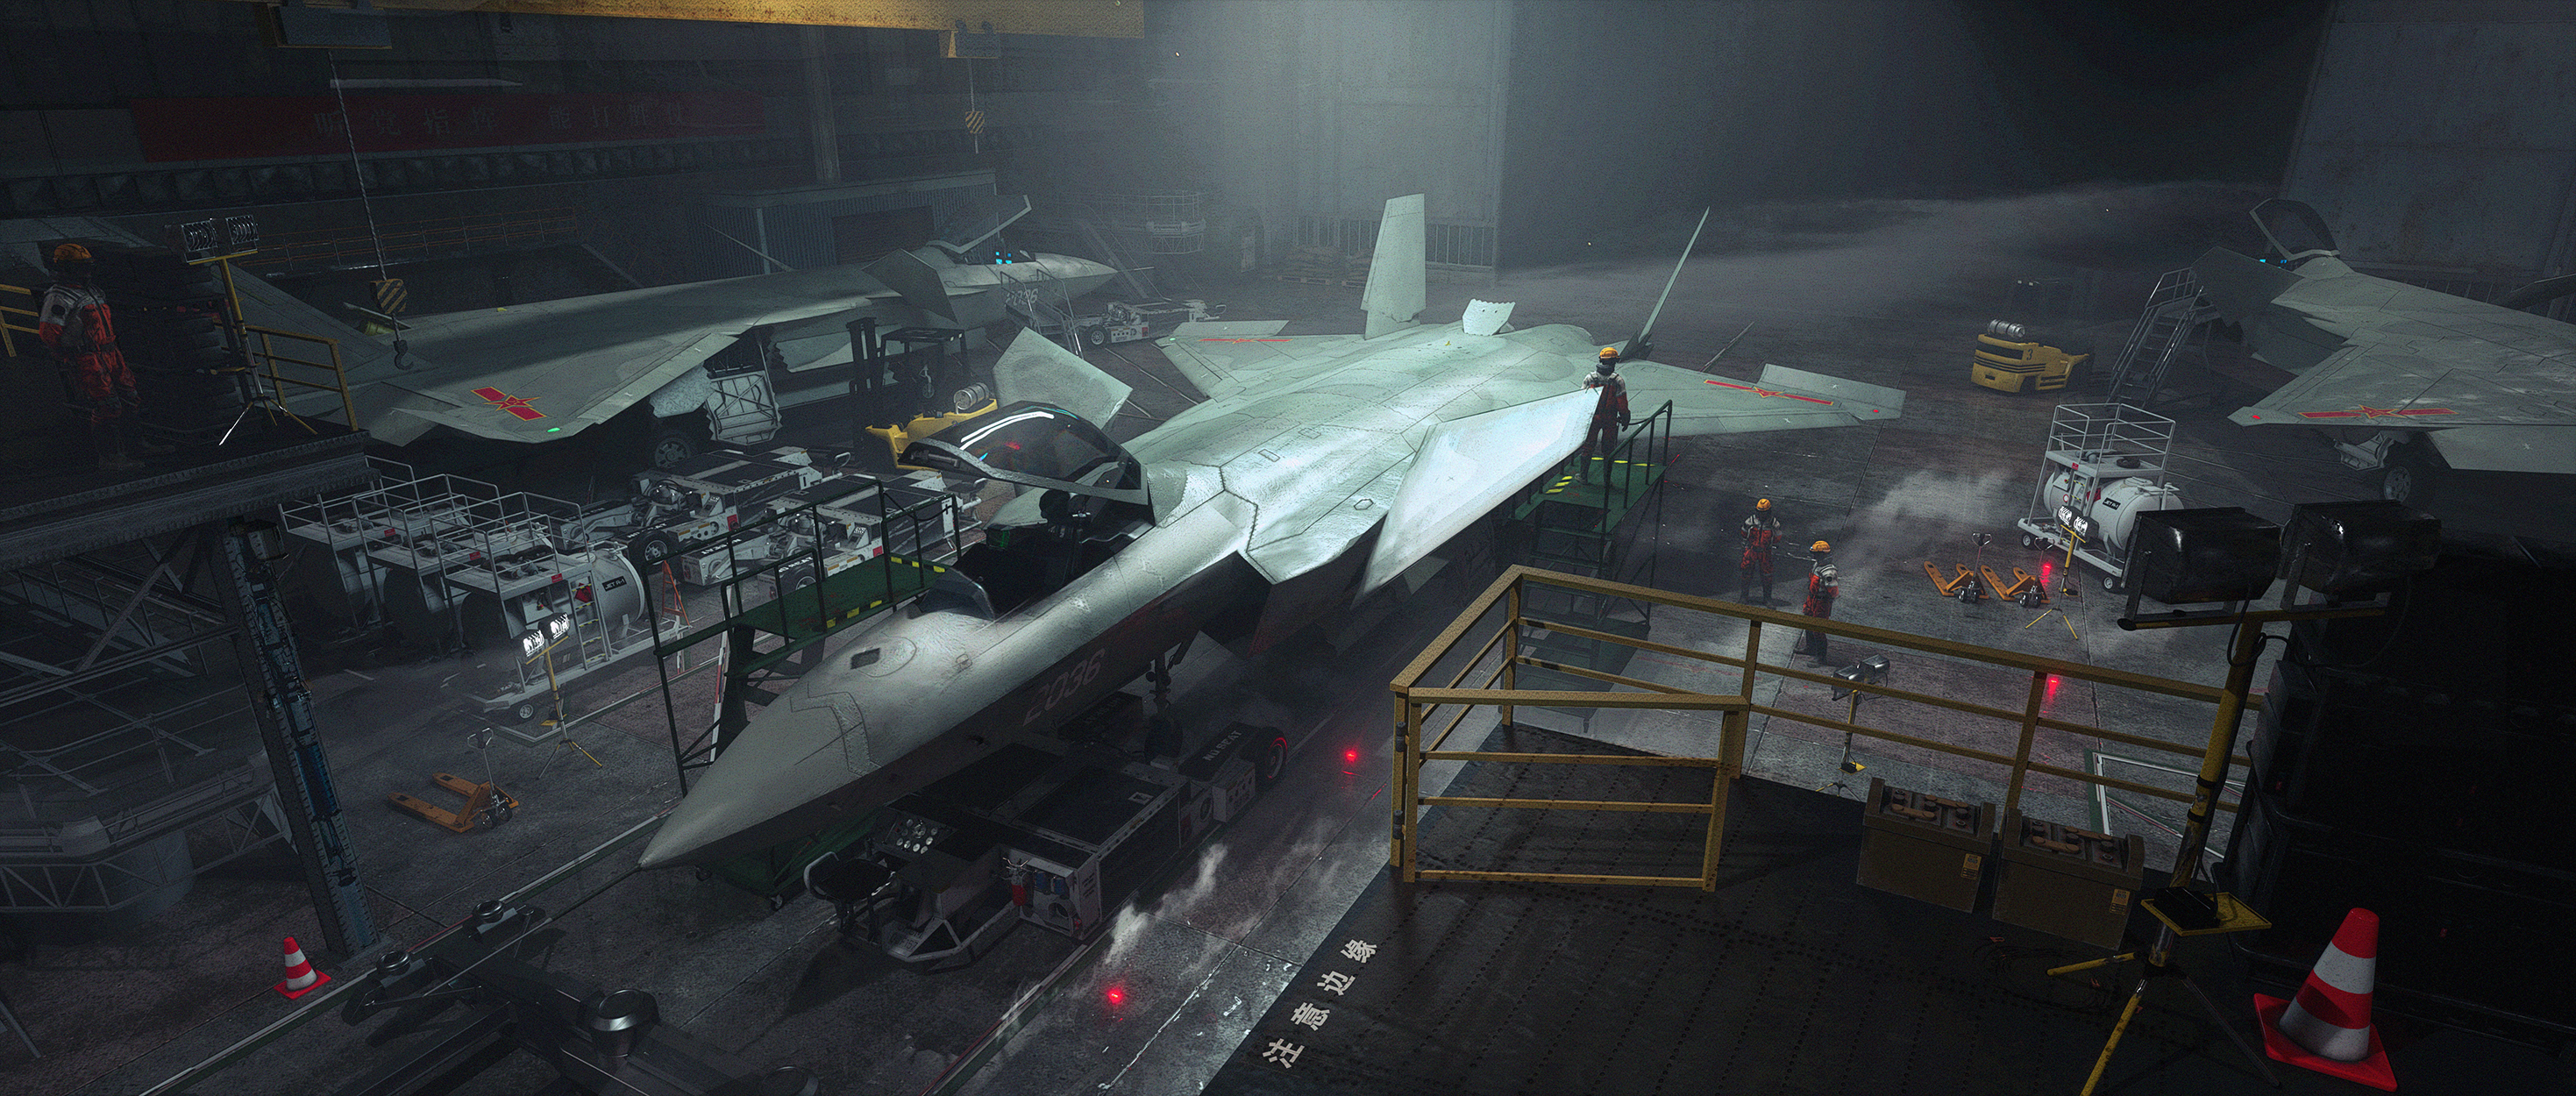 General 2938x1250 PLAAF air force aircraft jet fighter Chengdu J-20 CGI hangar Chinese Army military military aircraft white text